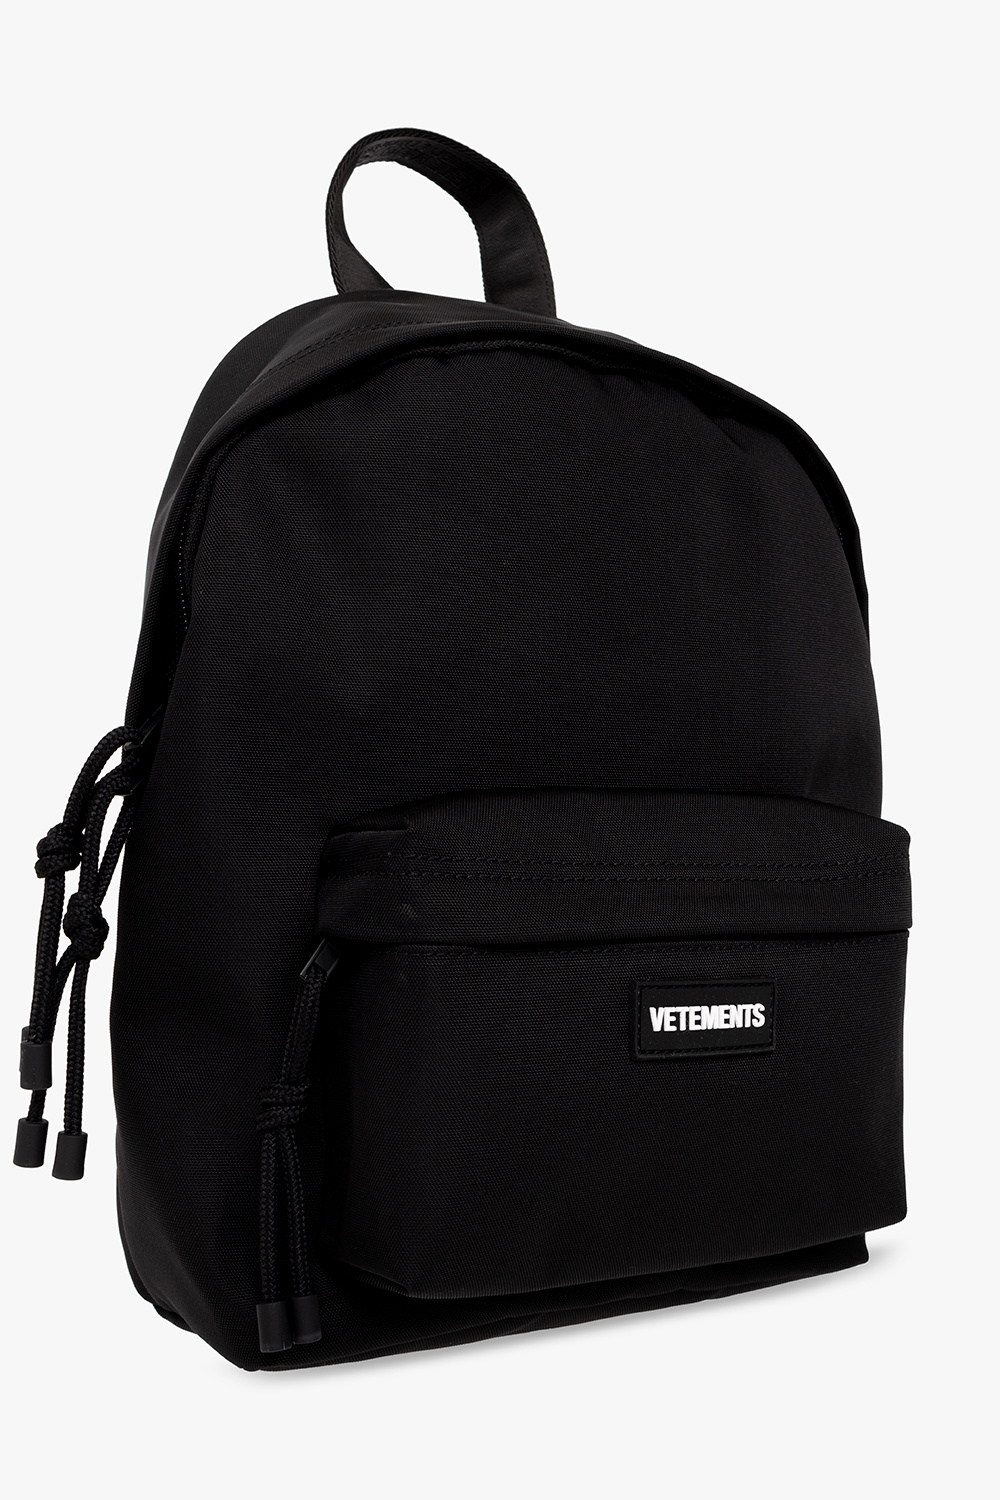 VETEMENTS backpack BURCH with logo